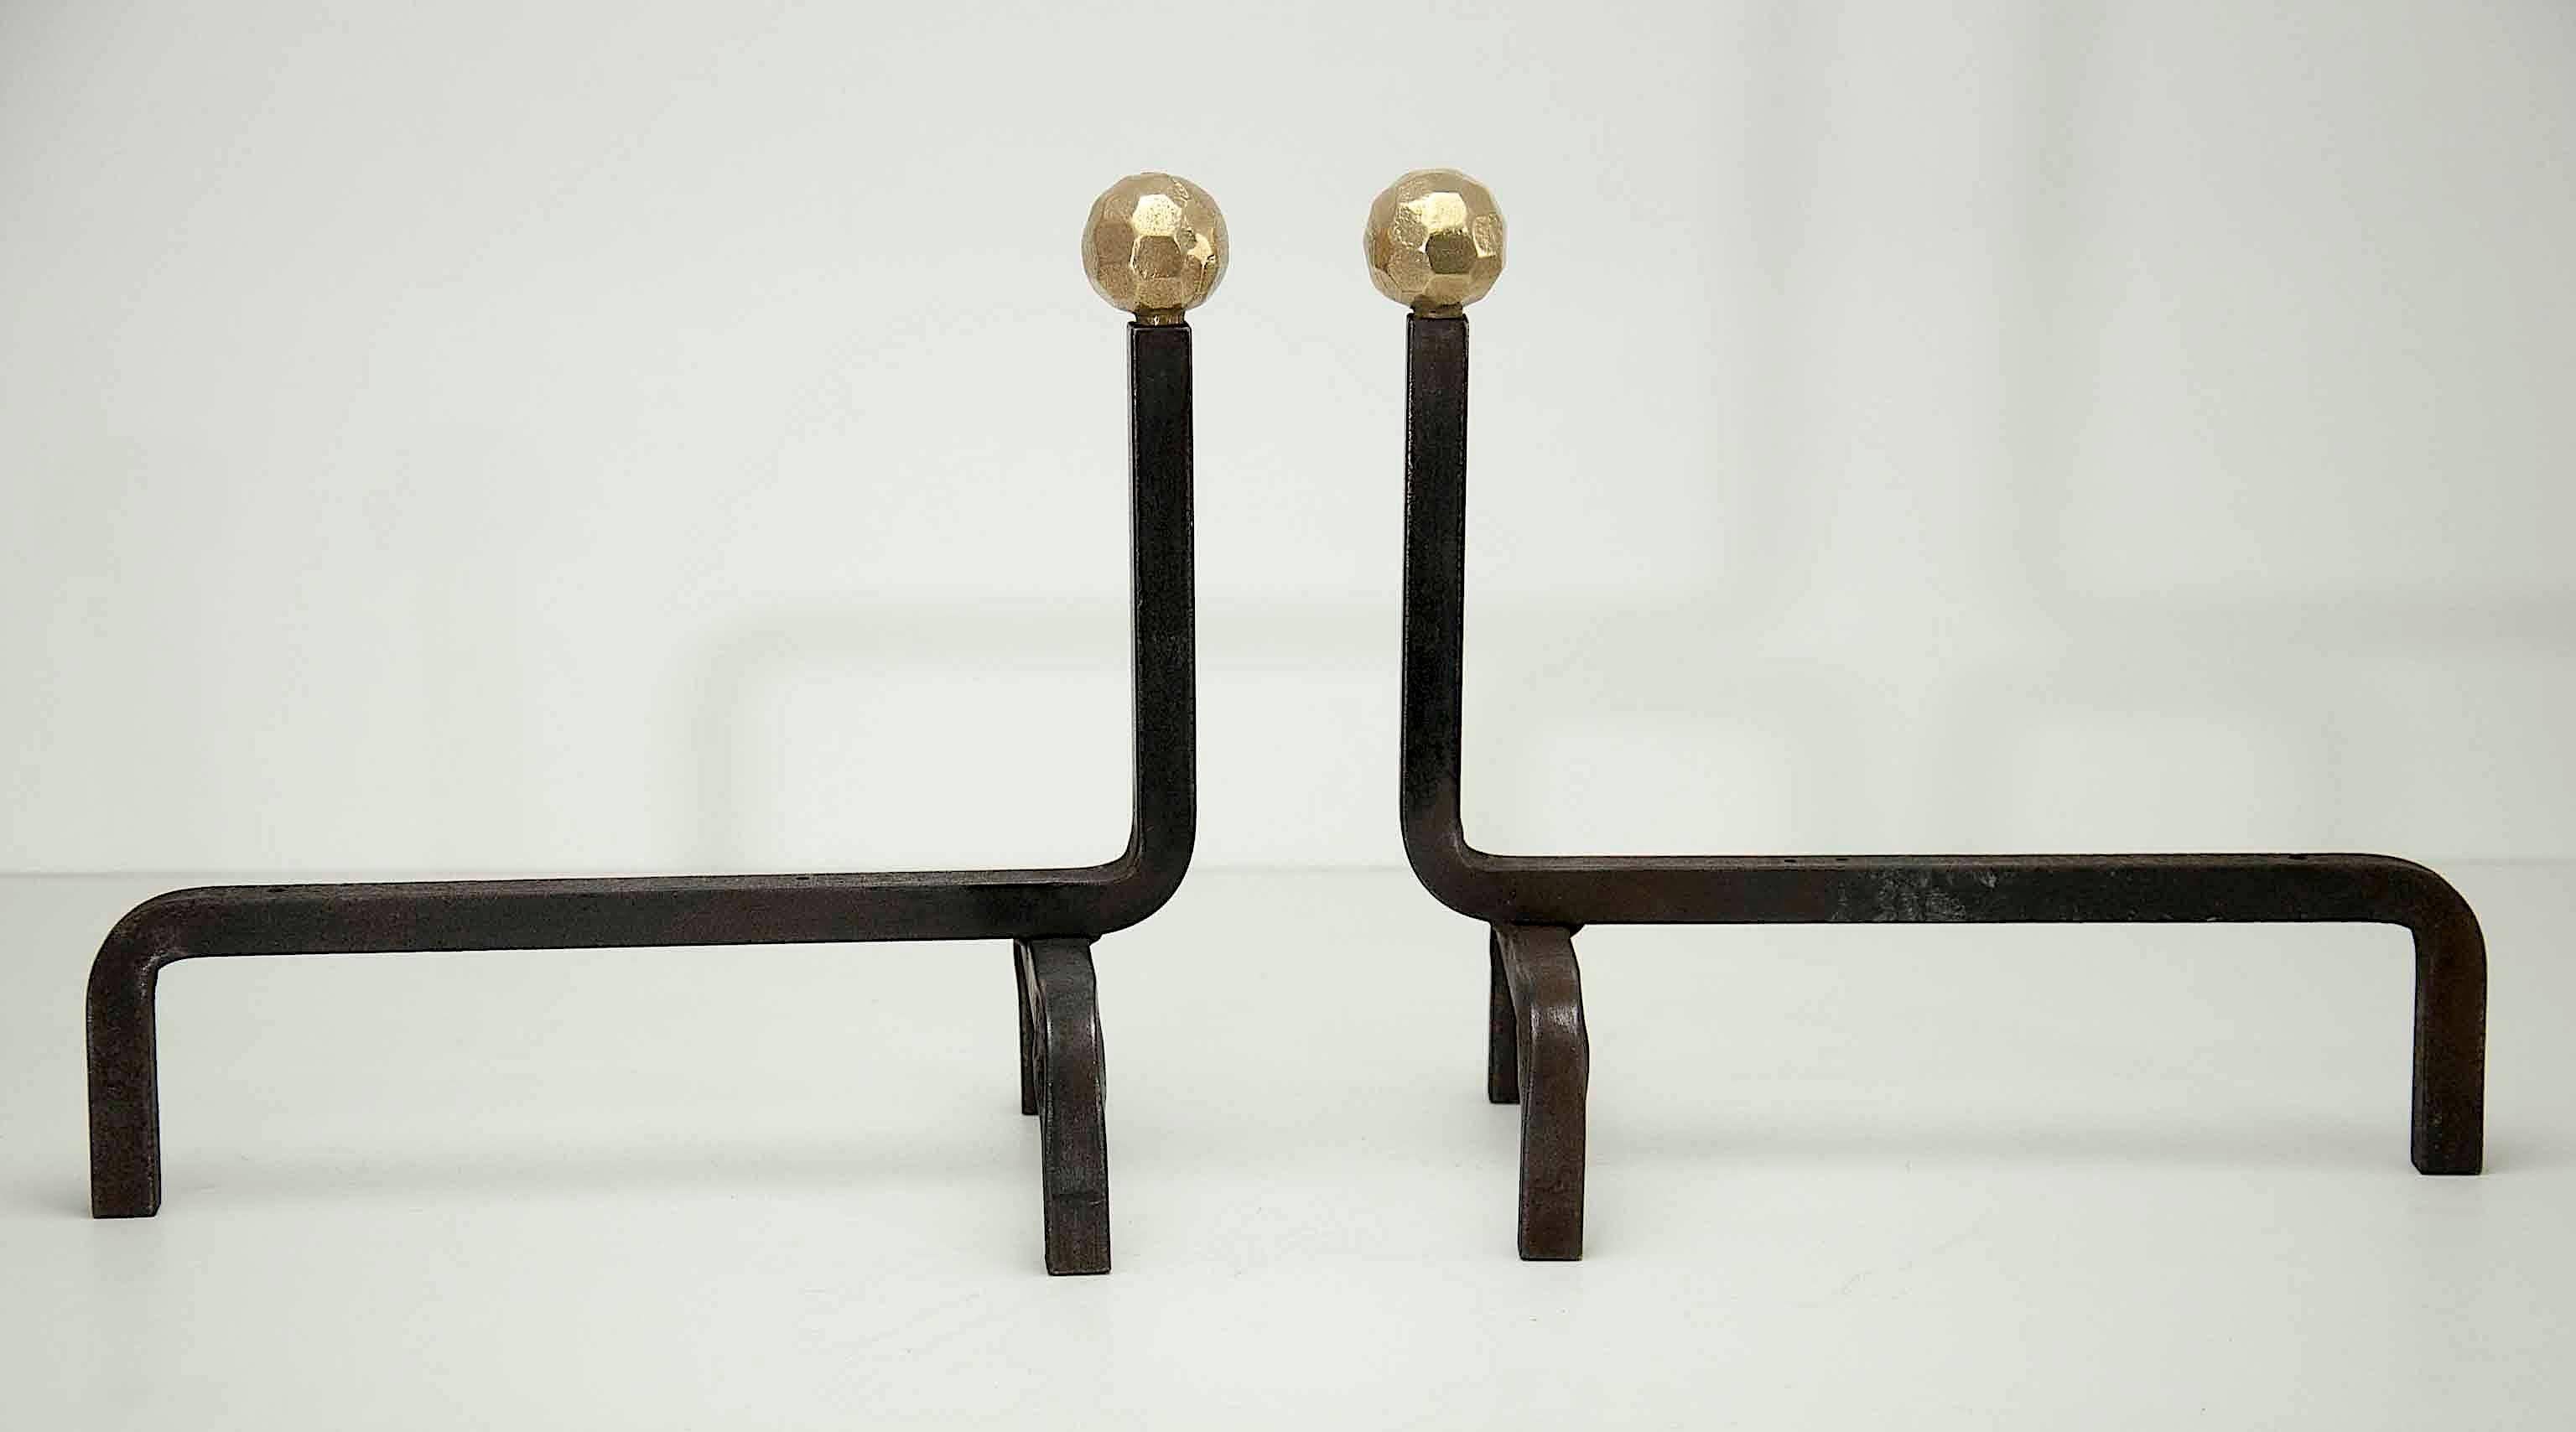 Art Deco Pair of Modernist Wrought Iron and Brass Fire Andirons